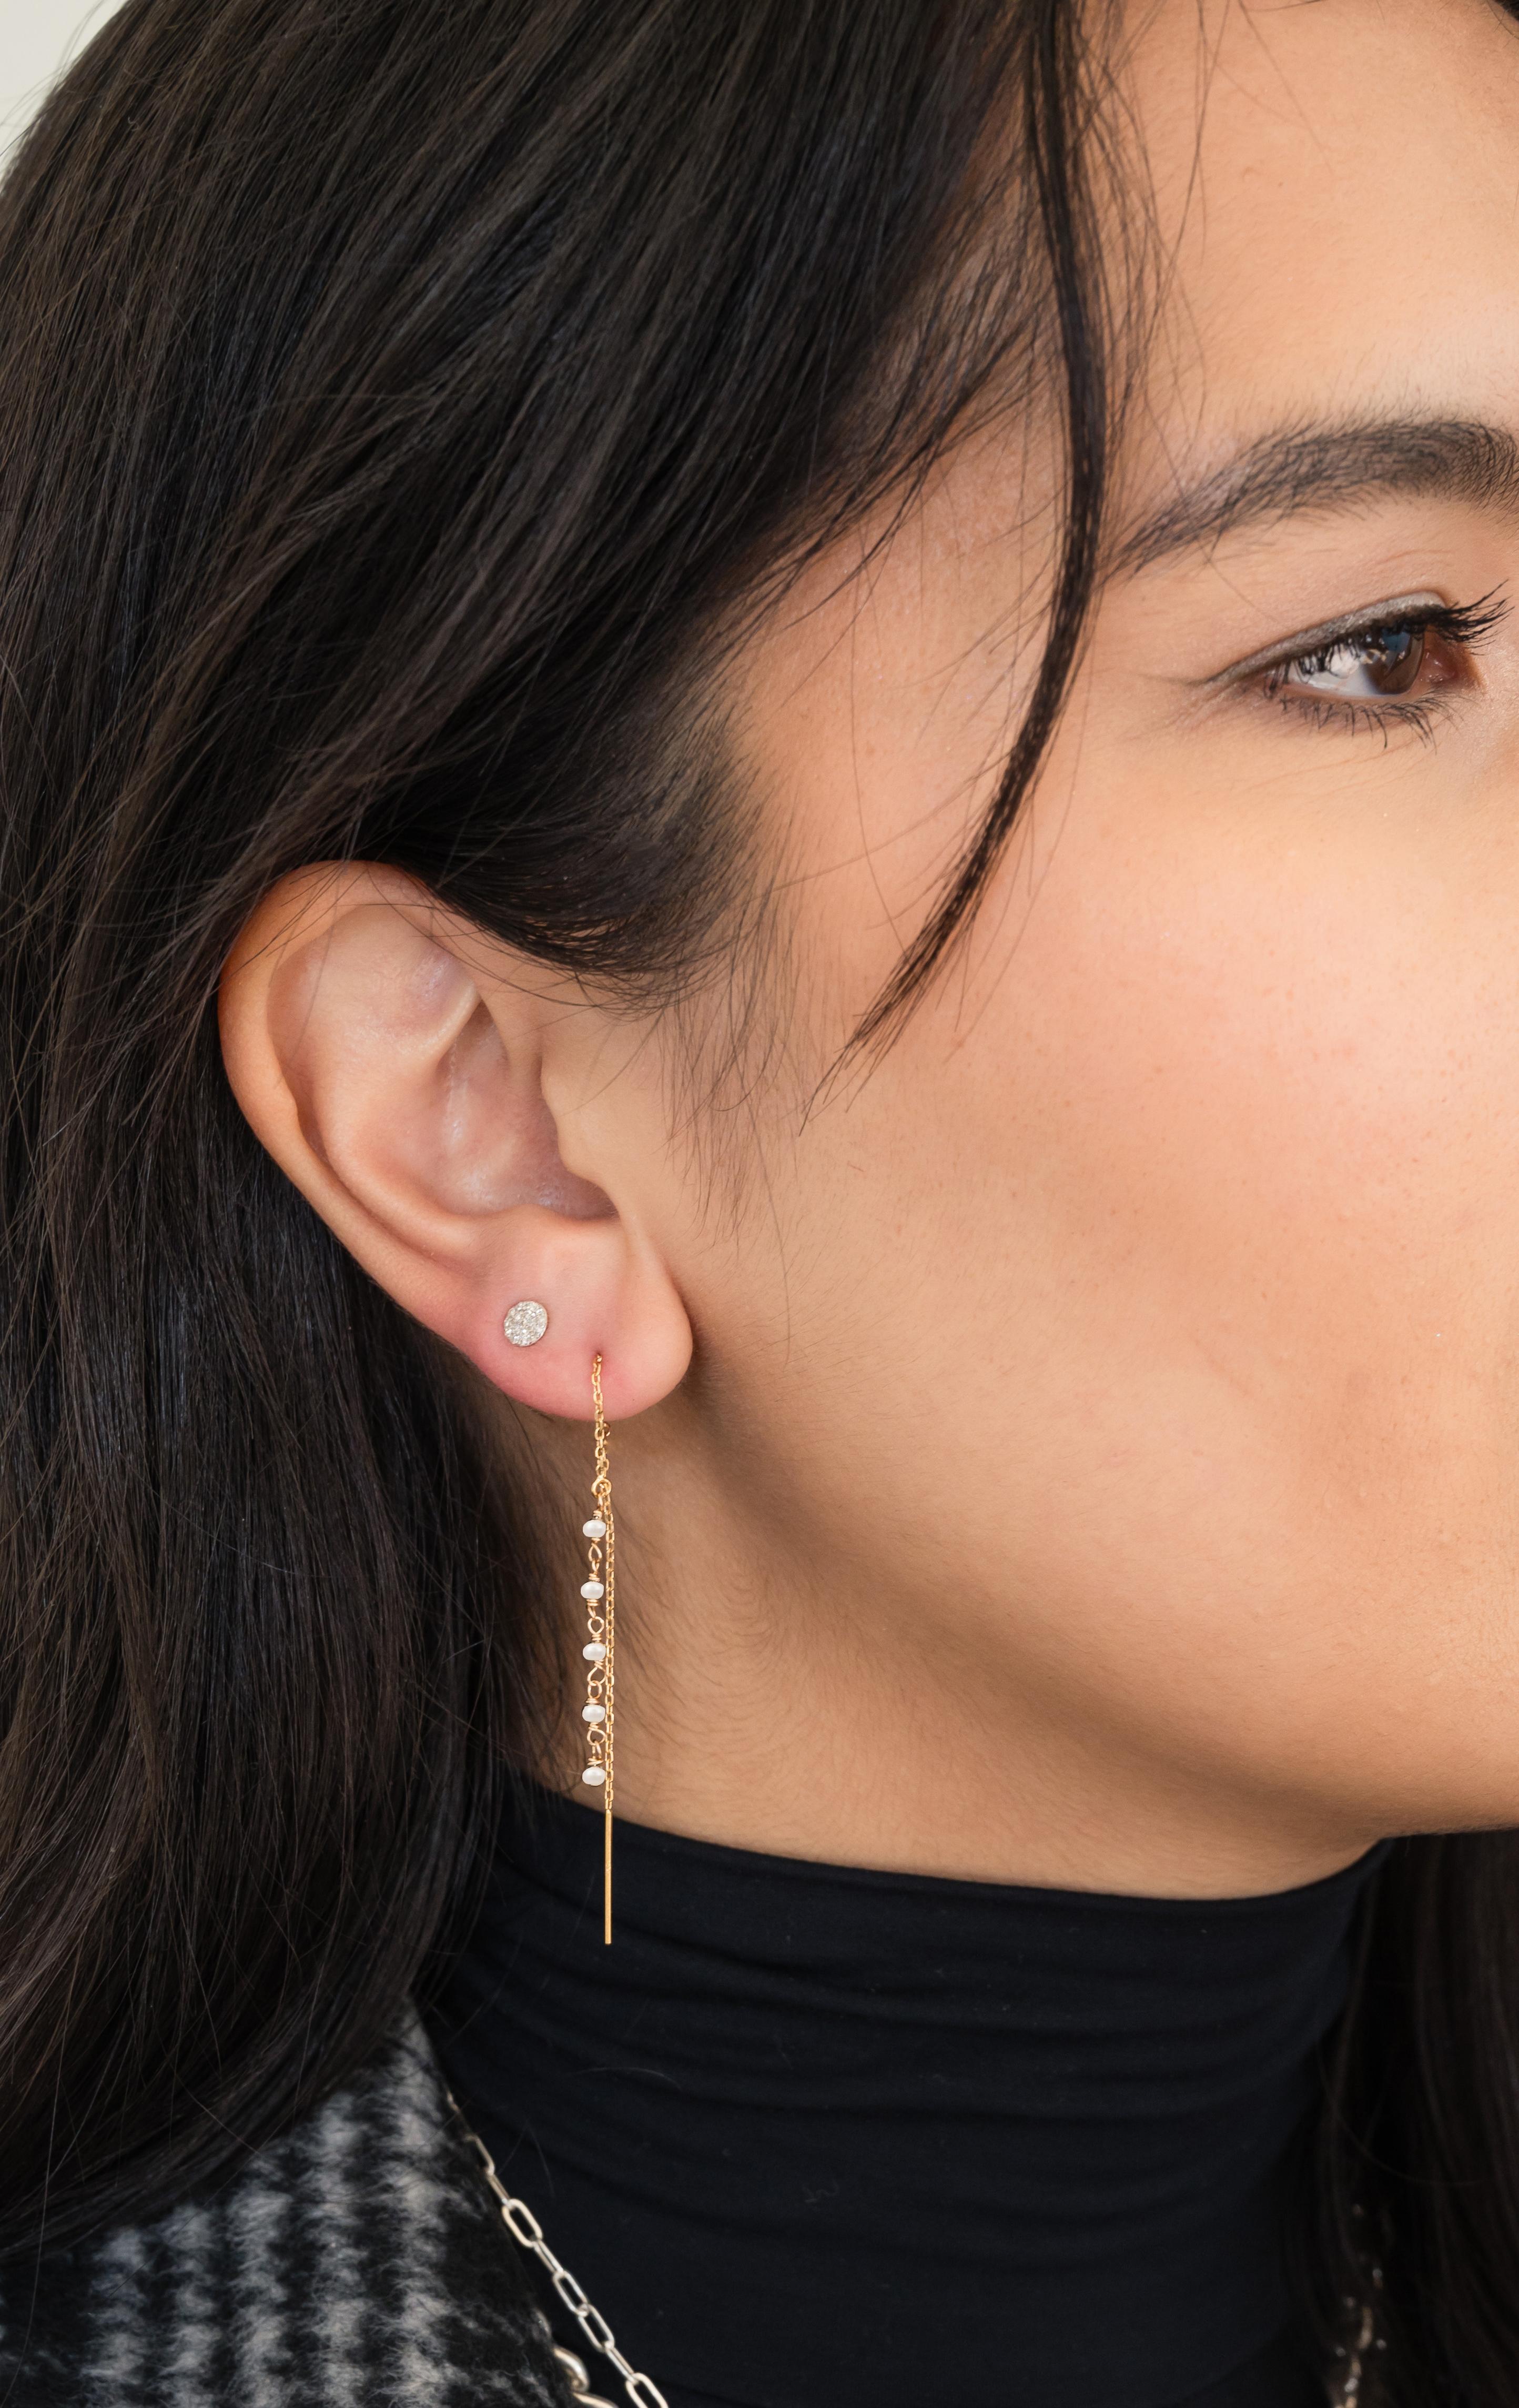 We took our 14K Gold Threader earrings and added some WOW! These earrings are airy, weightless, and sparkly-and now with a POP of color. You can wear them with everything so effortlessly! Wear dangling free, or pull through the loop for a different